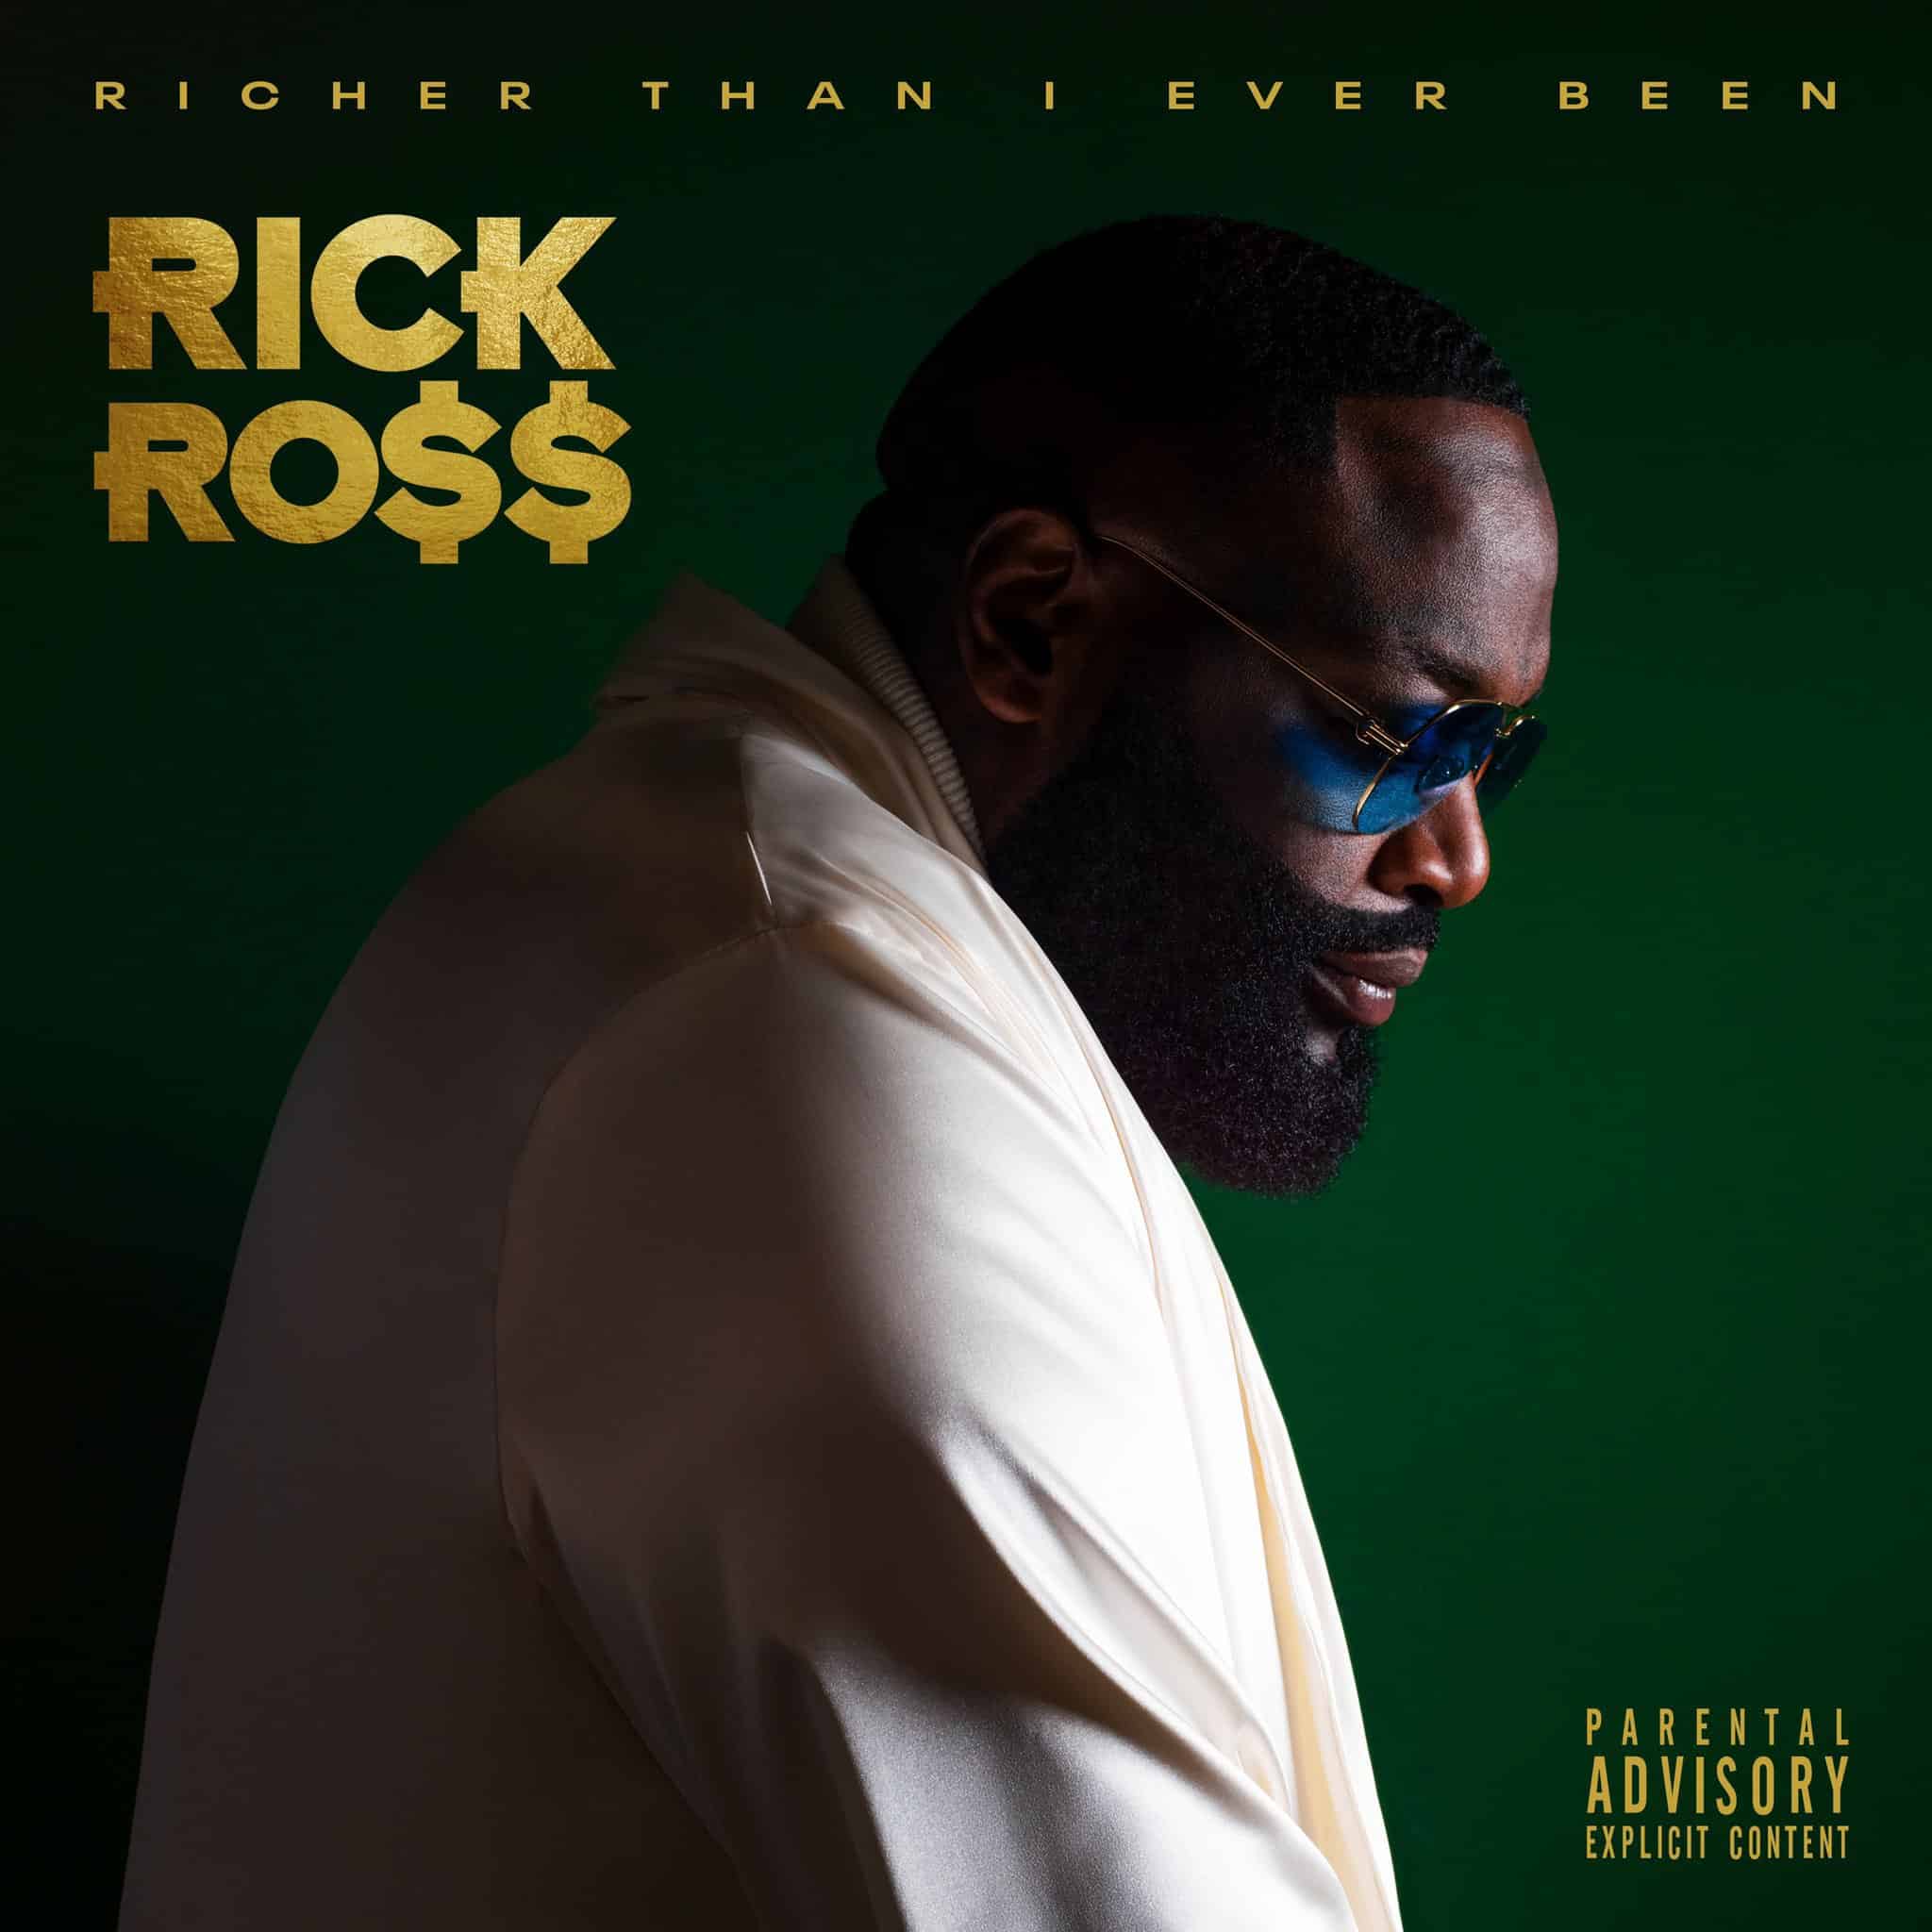 Rick Ross Releases His New Album Richer Than I Ever Been